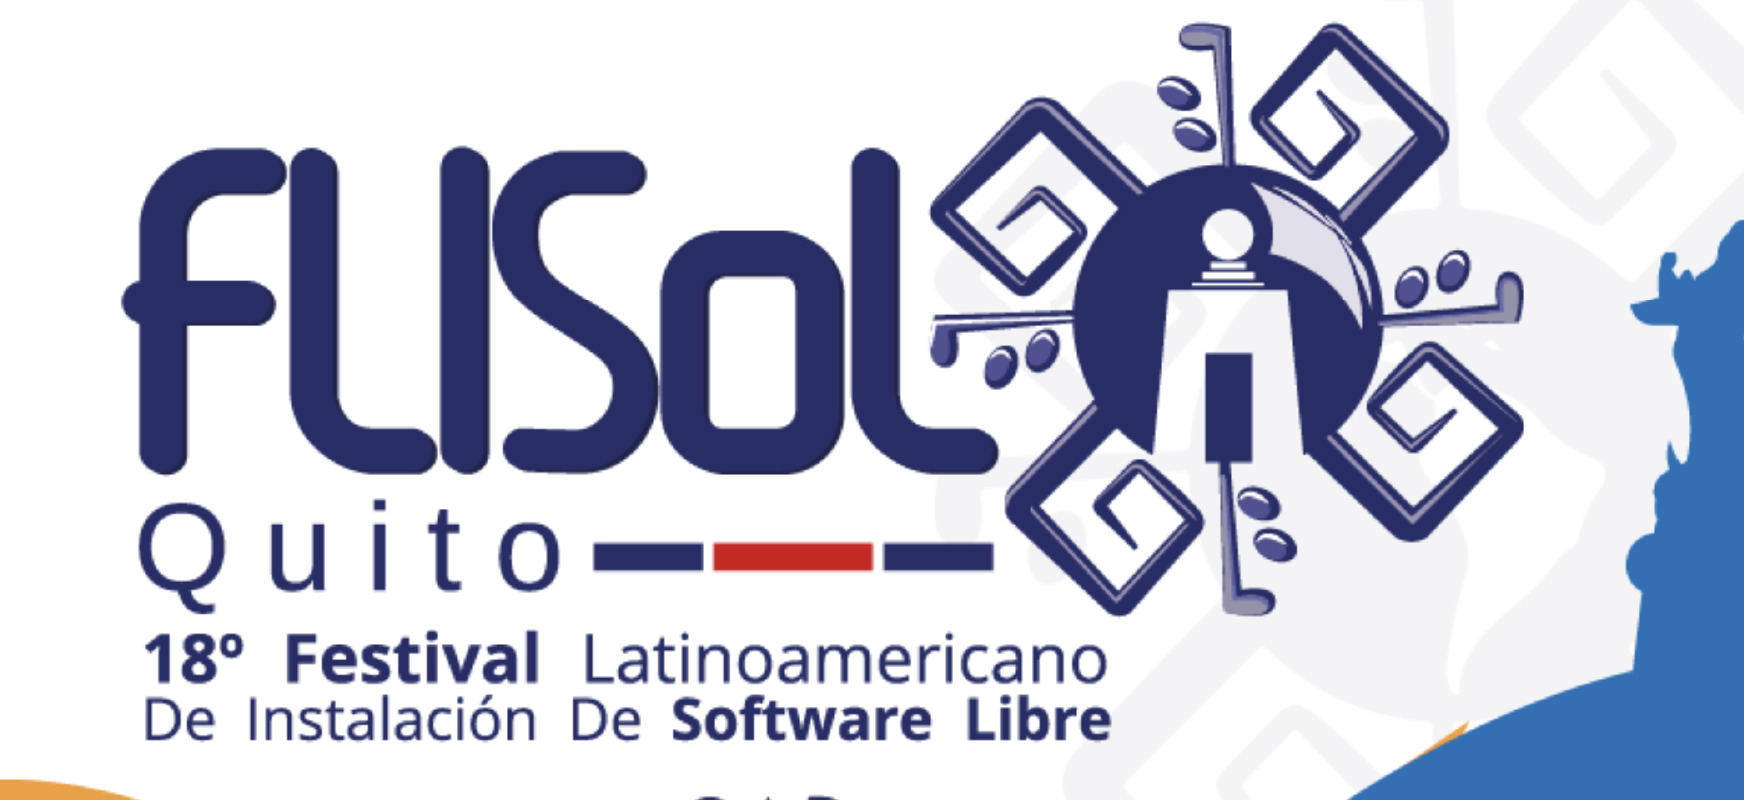 CAD at the 18<sup>th</sup> edition of FLISoL Quito